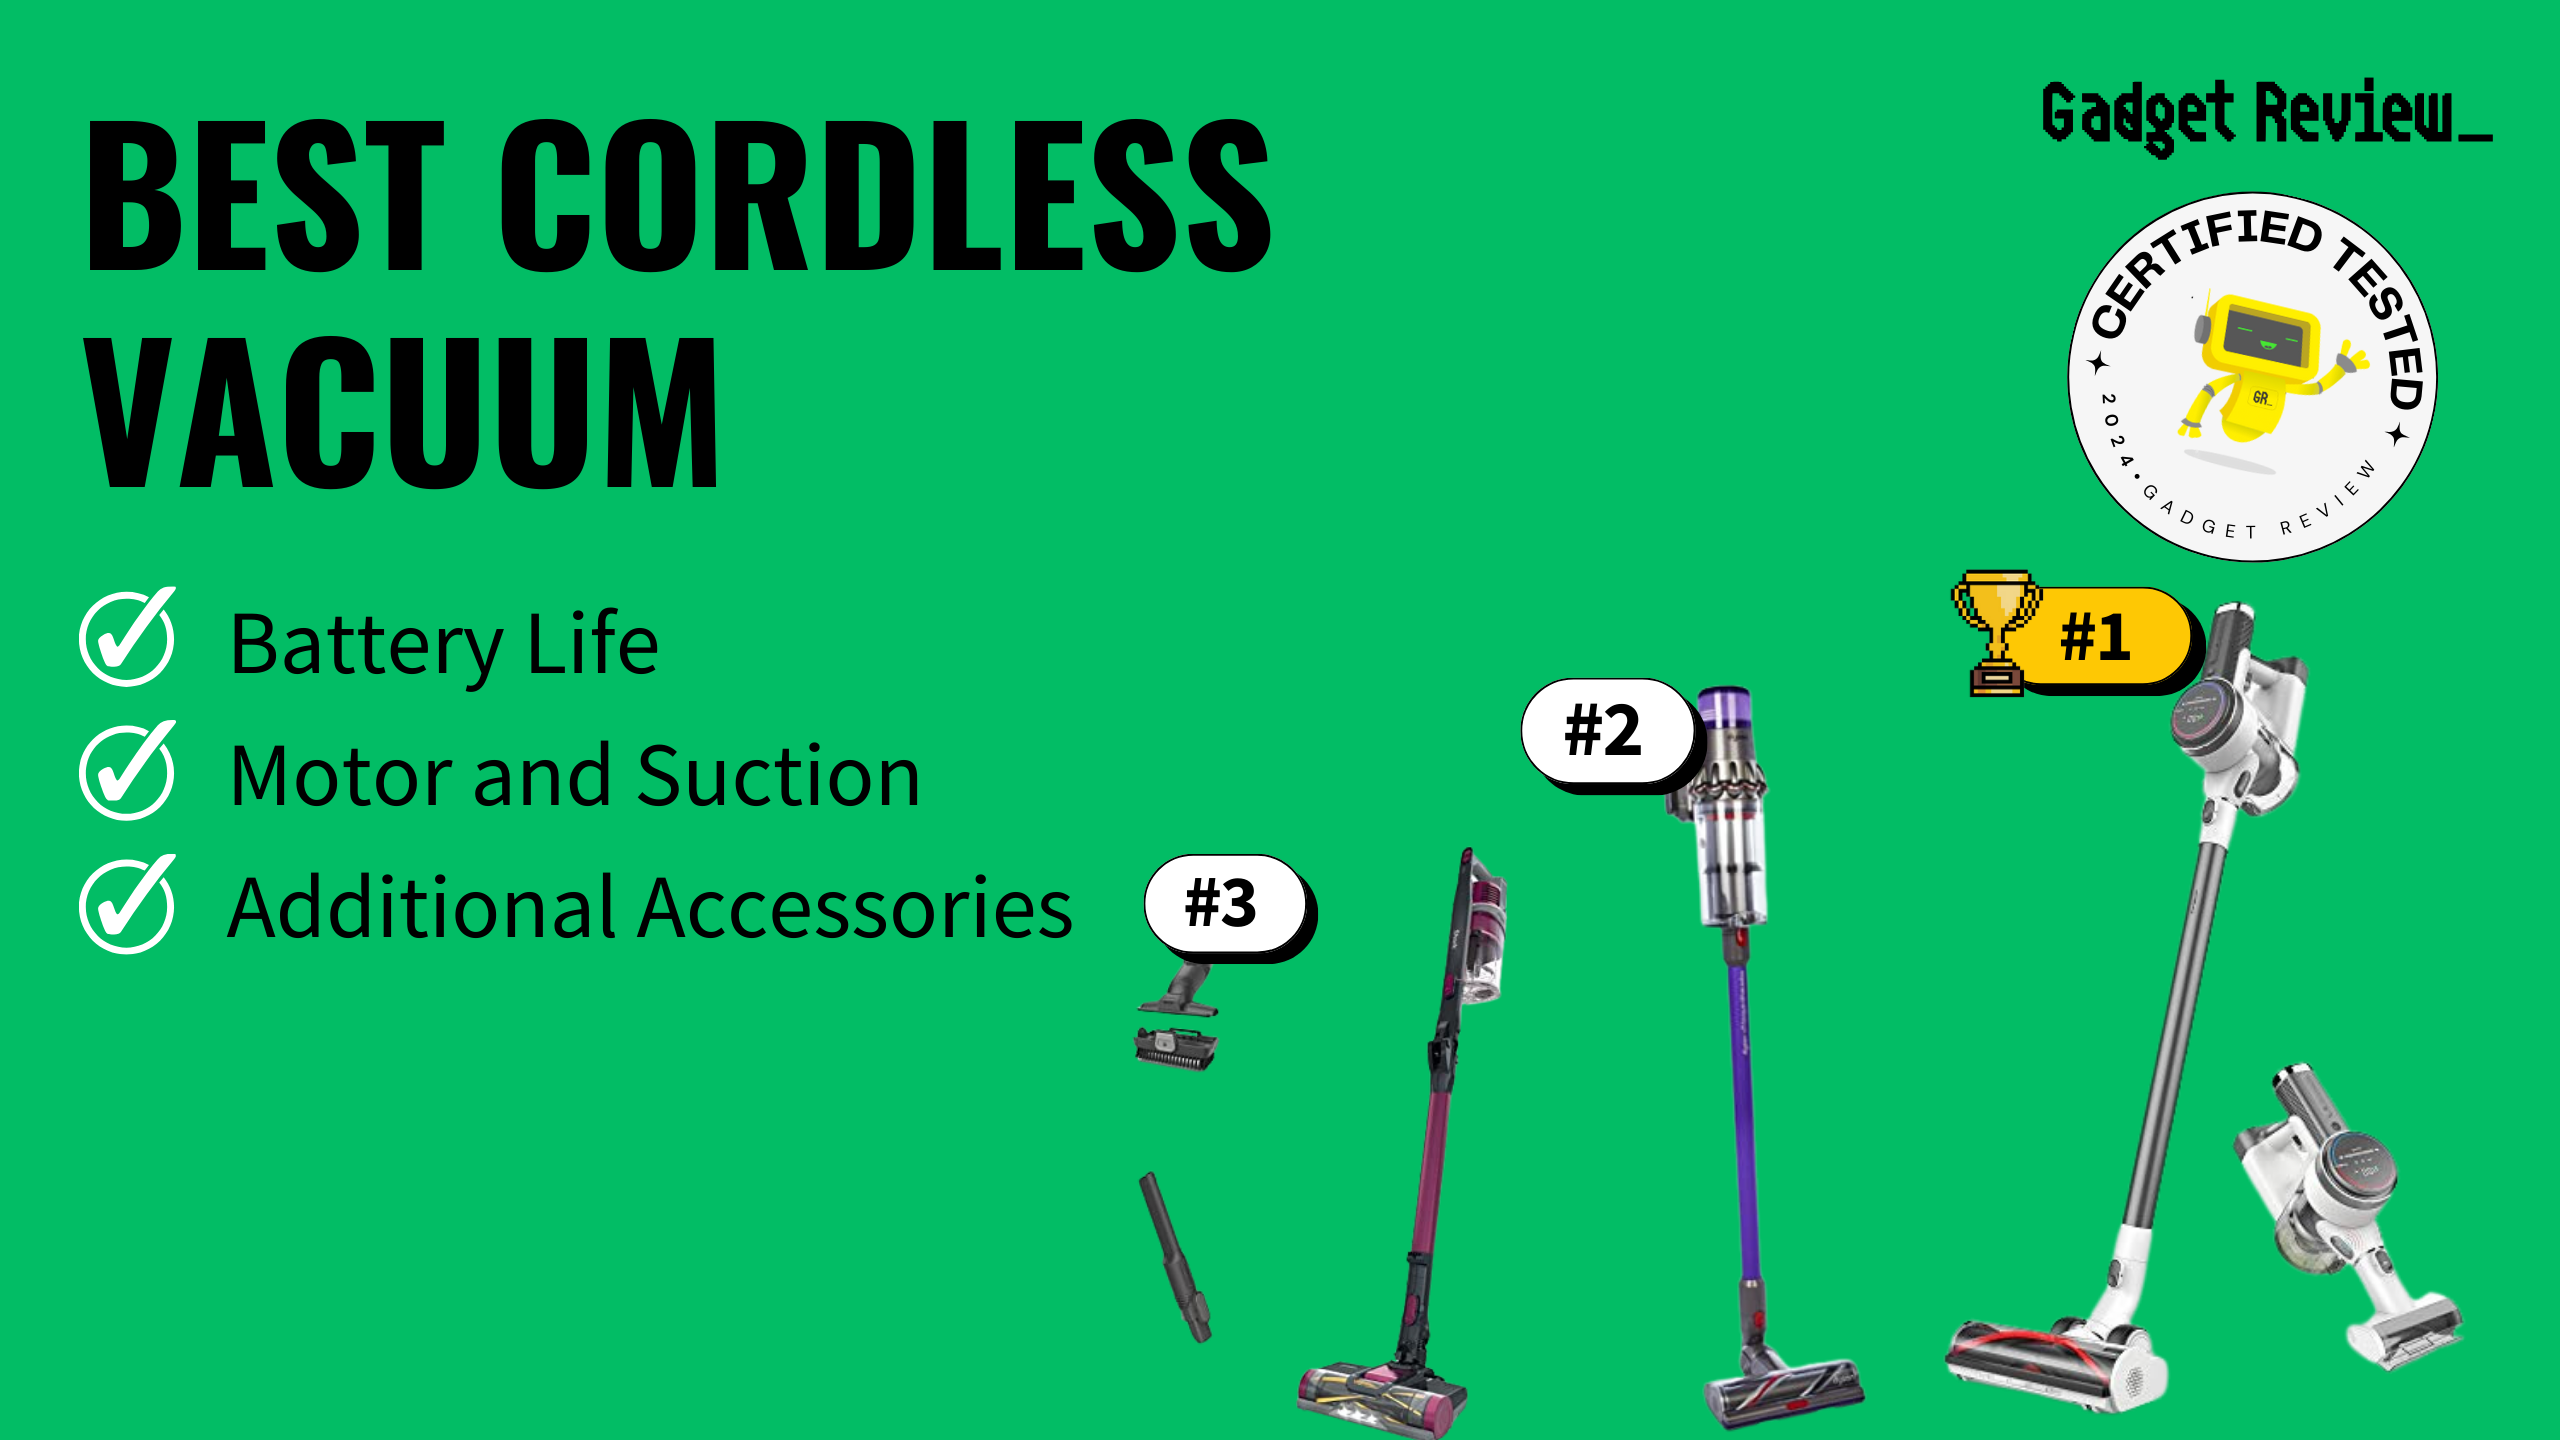 best cordless vacuums guide that shows the top best vacuum cleaner model